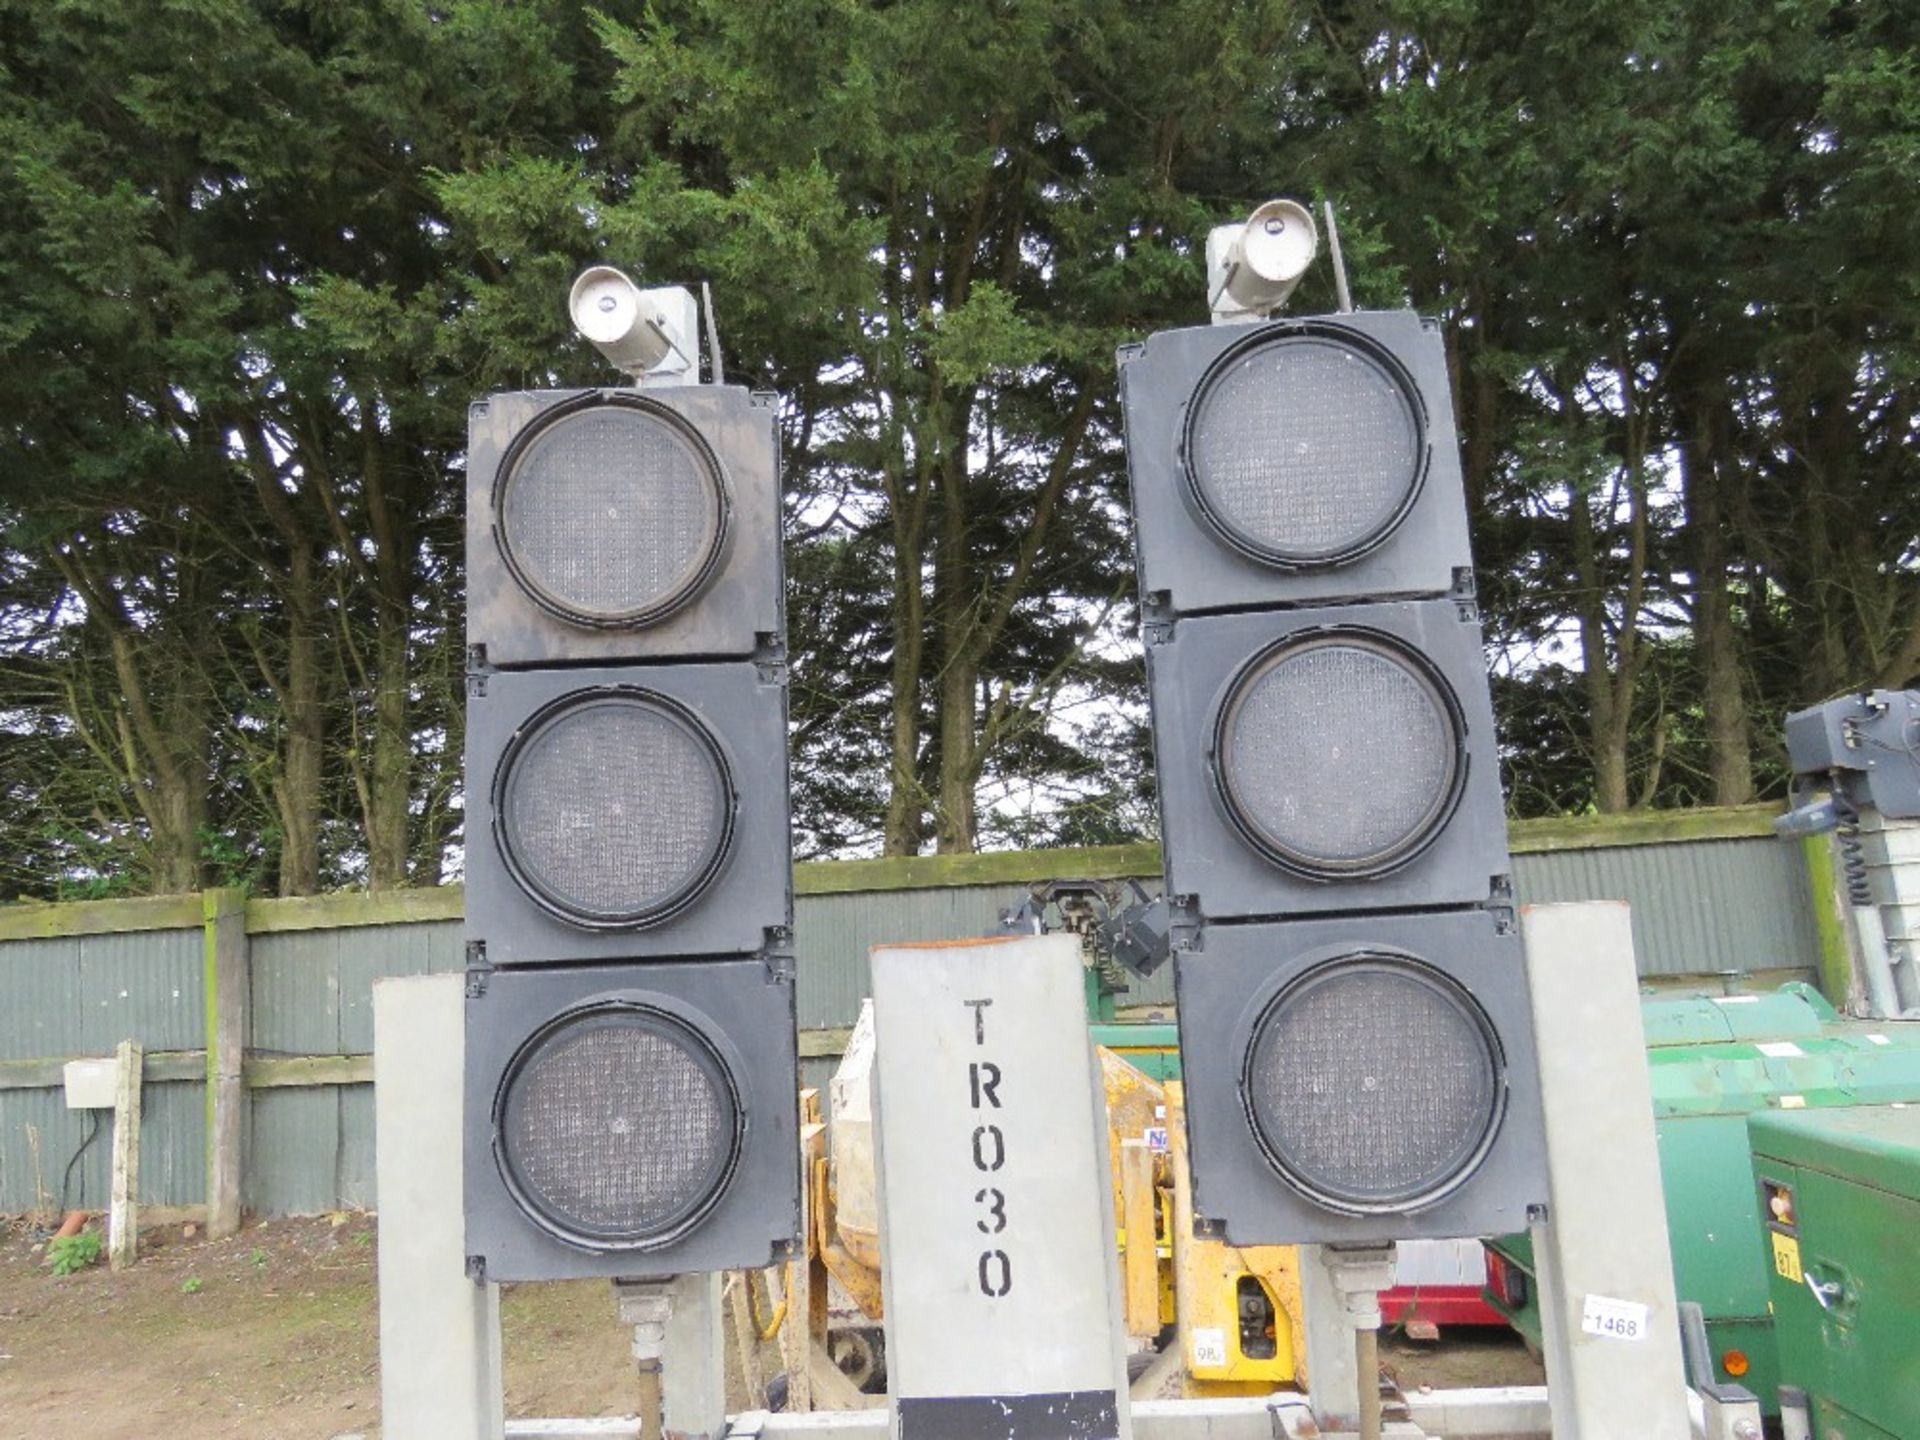 TRAFFIC LIGHT TRAILER AND LIGHTS (NO BATTERIES) INCLUDING A CHARGER UNIT. - Image 3 of 9